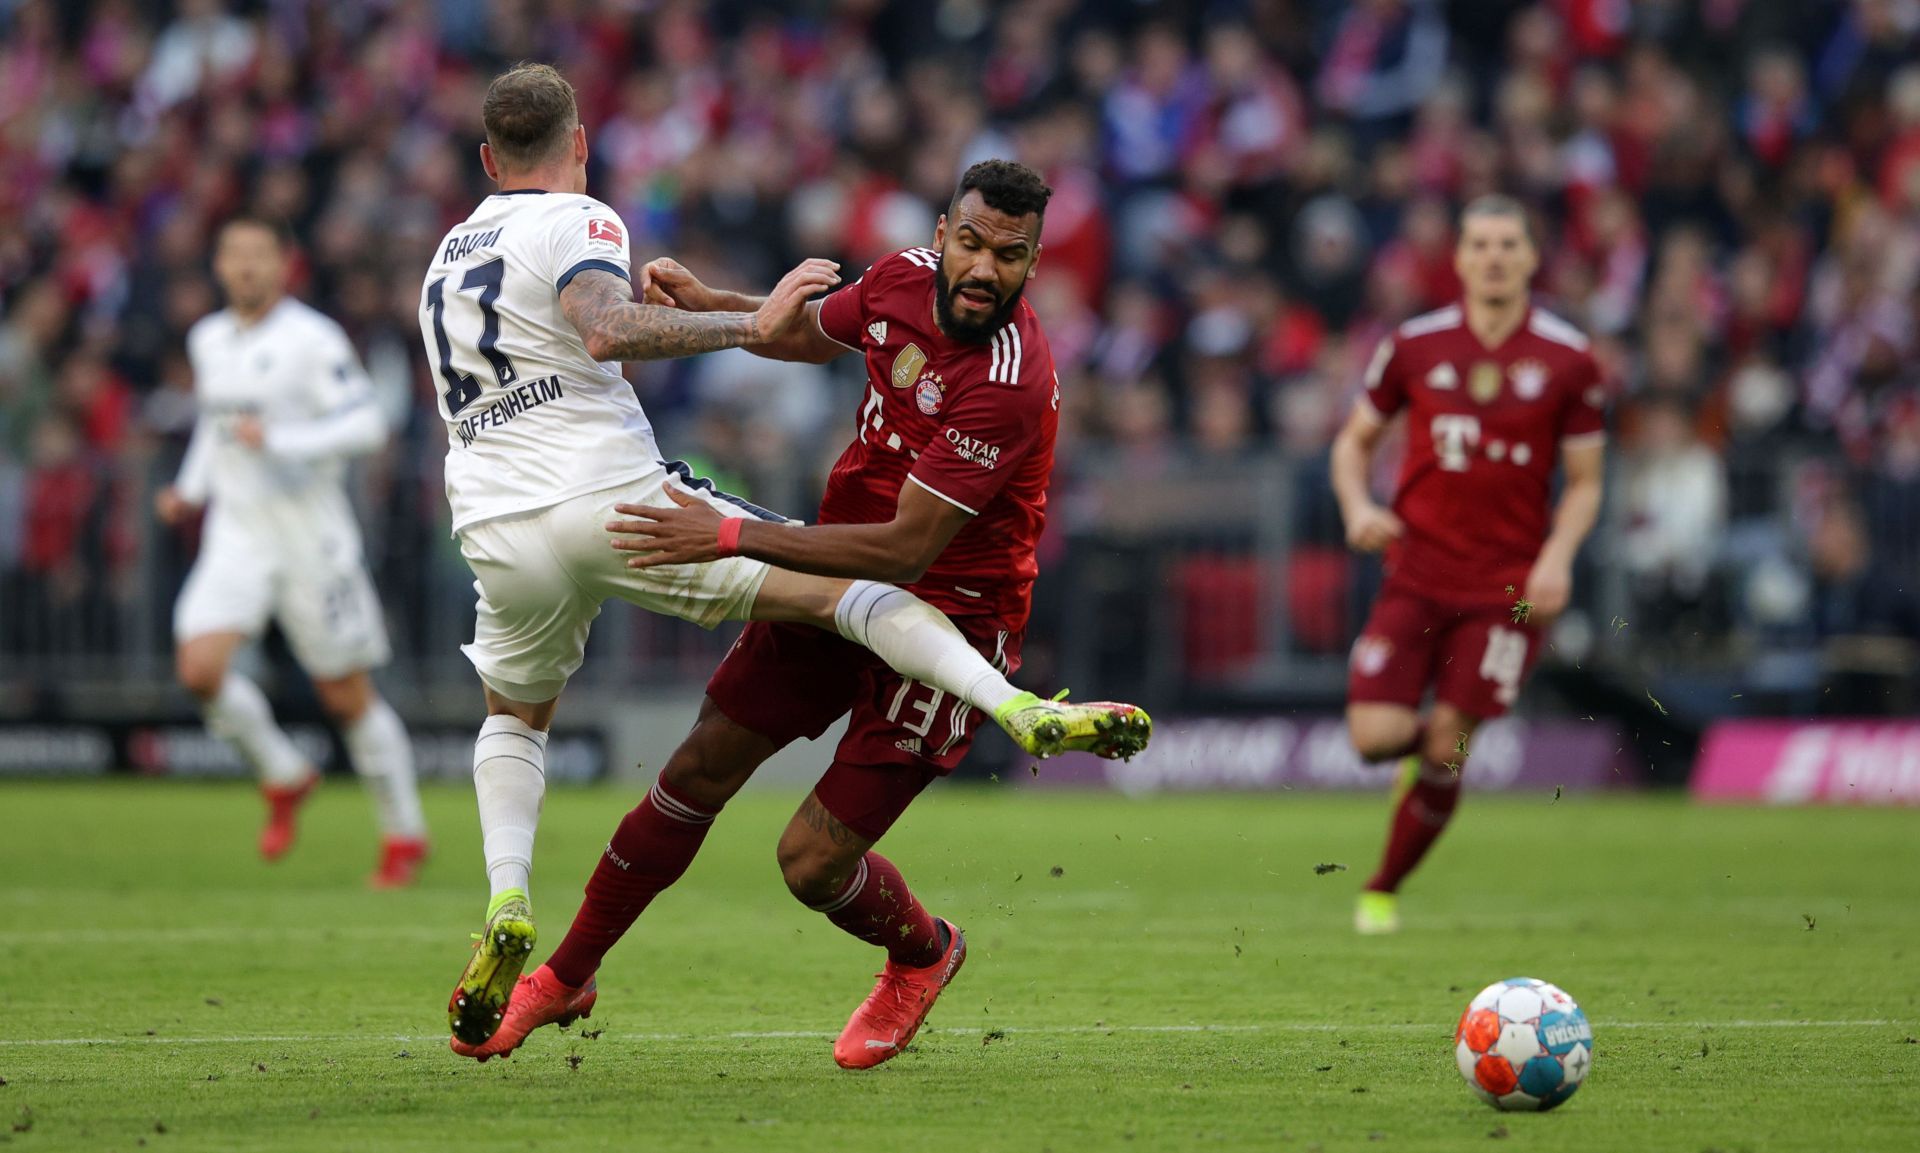 Bayern have struck four goals in their last two league clashes with Hoffenheim